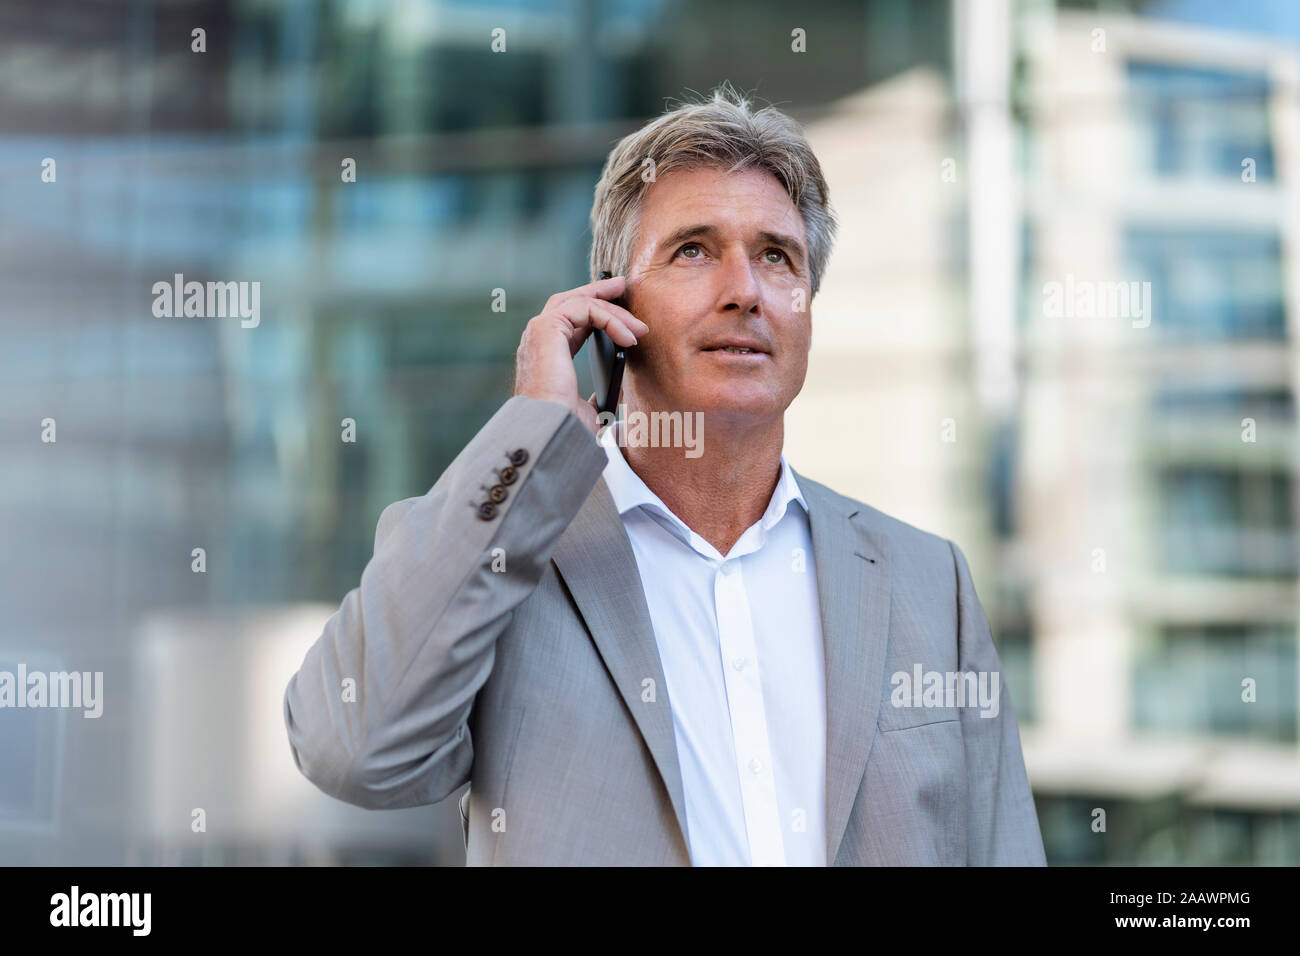 Mature businessman on the phone in the city Stock Photo